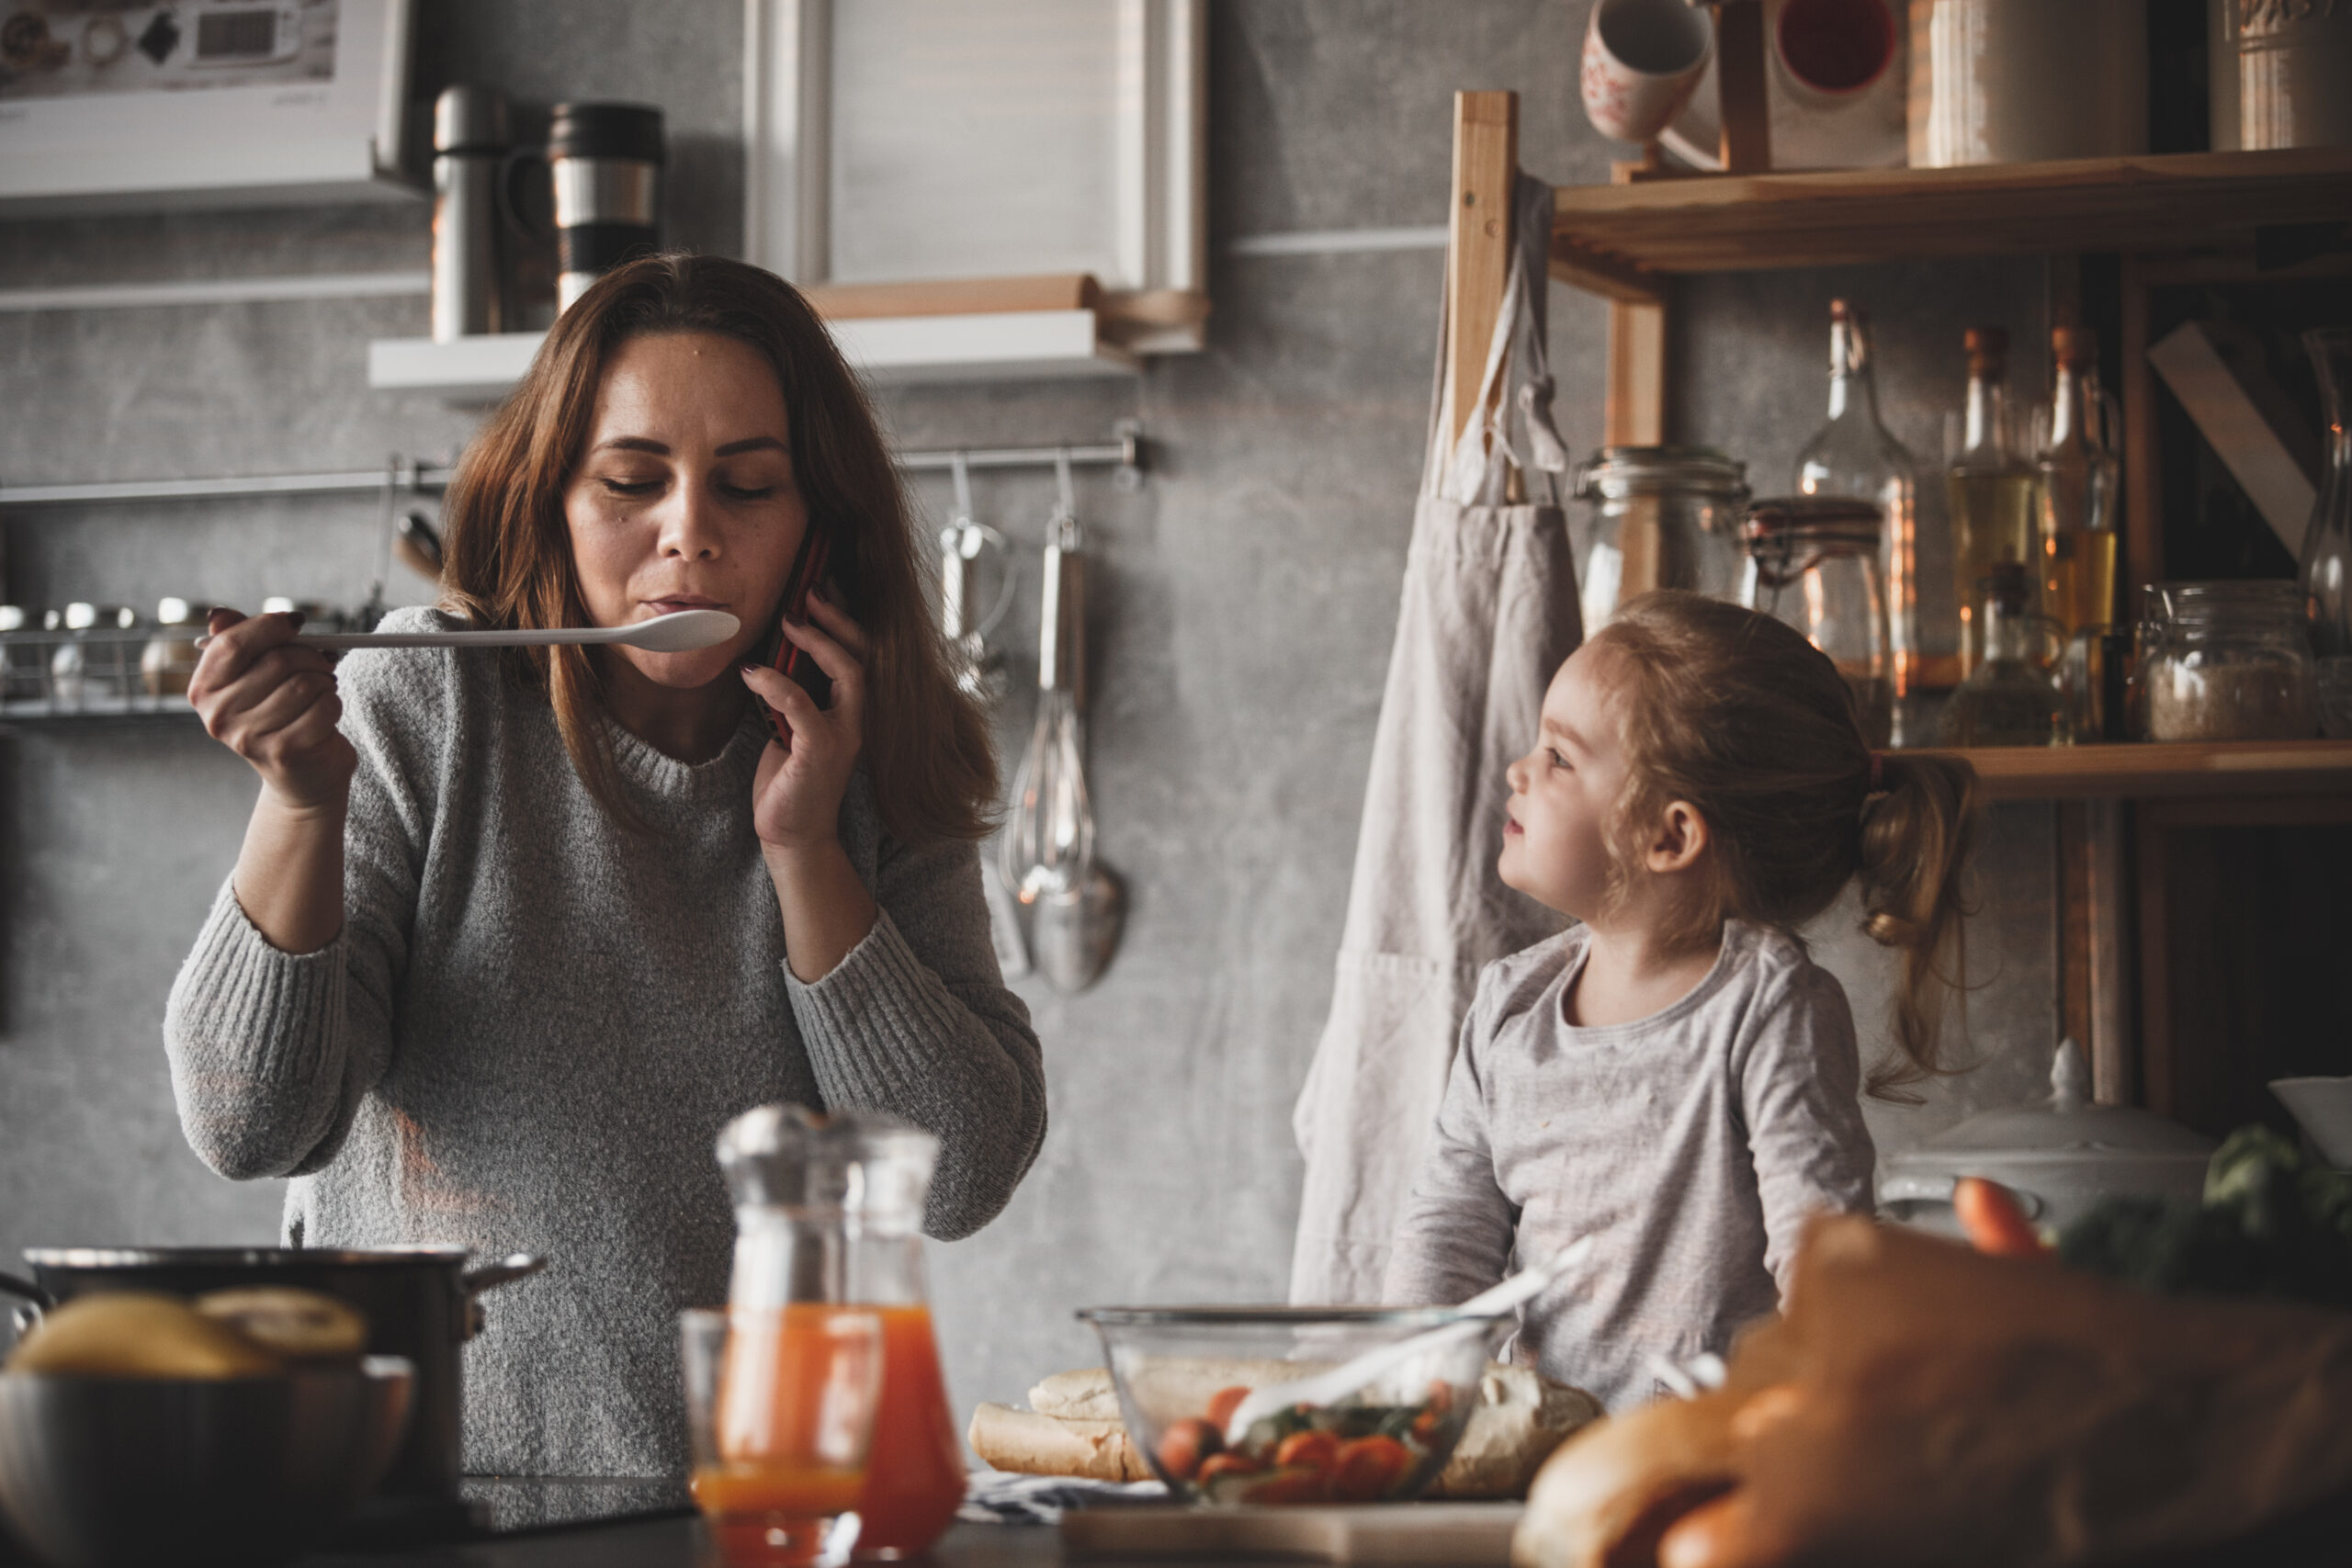 Mother and daughter cooking together, woman talking on the phone.